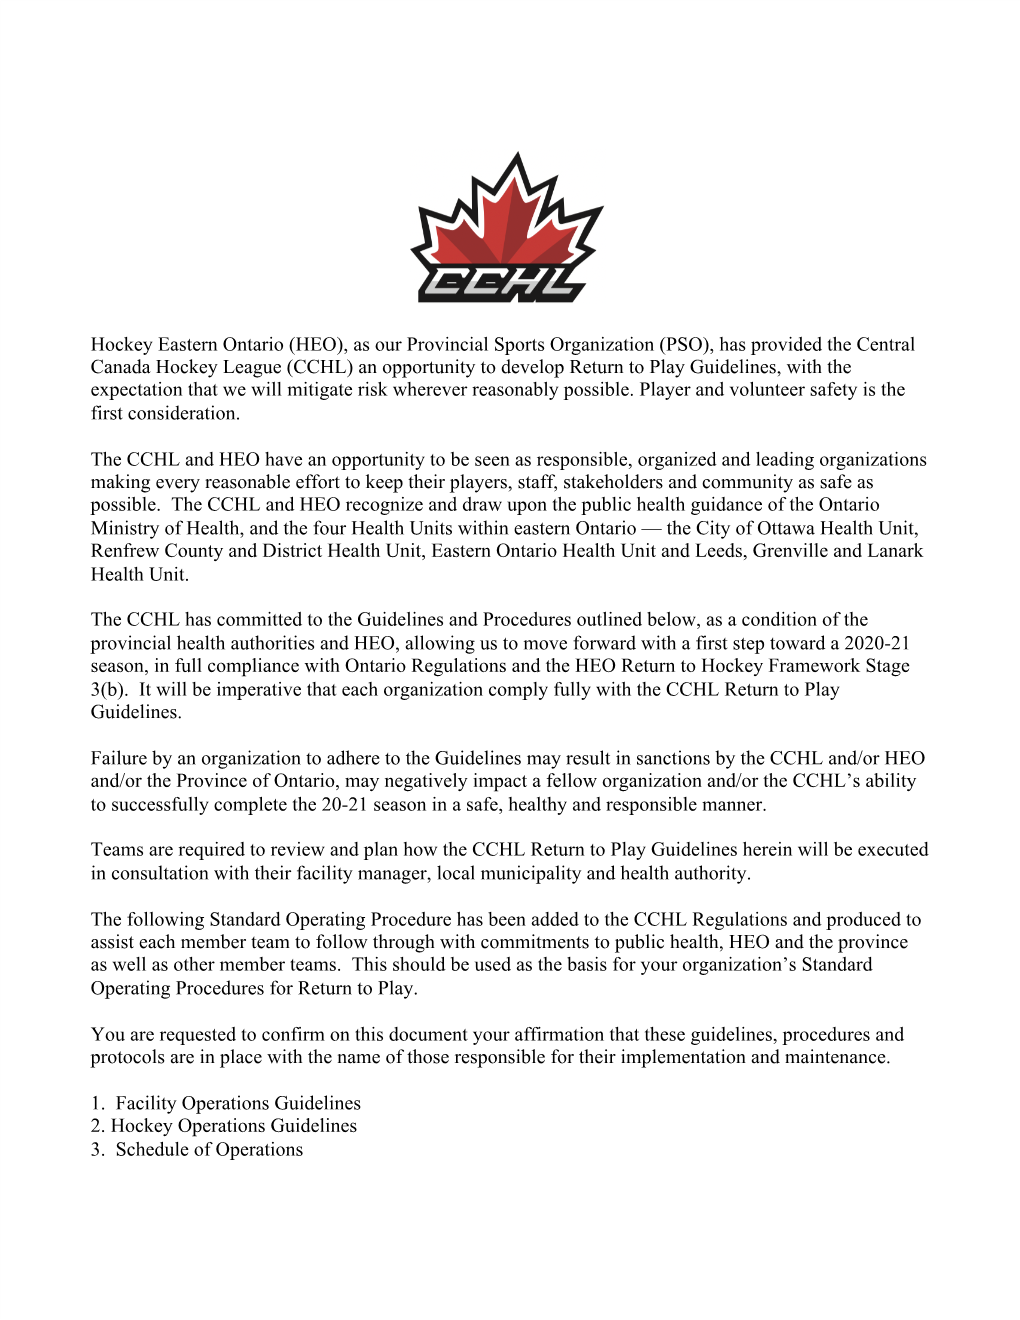 Hockey Eastern Ontario (HEO), As Our Provincial Sports Organization (PSO), Has Provided the Central Canada Hockey League (CCHL)